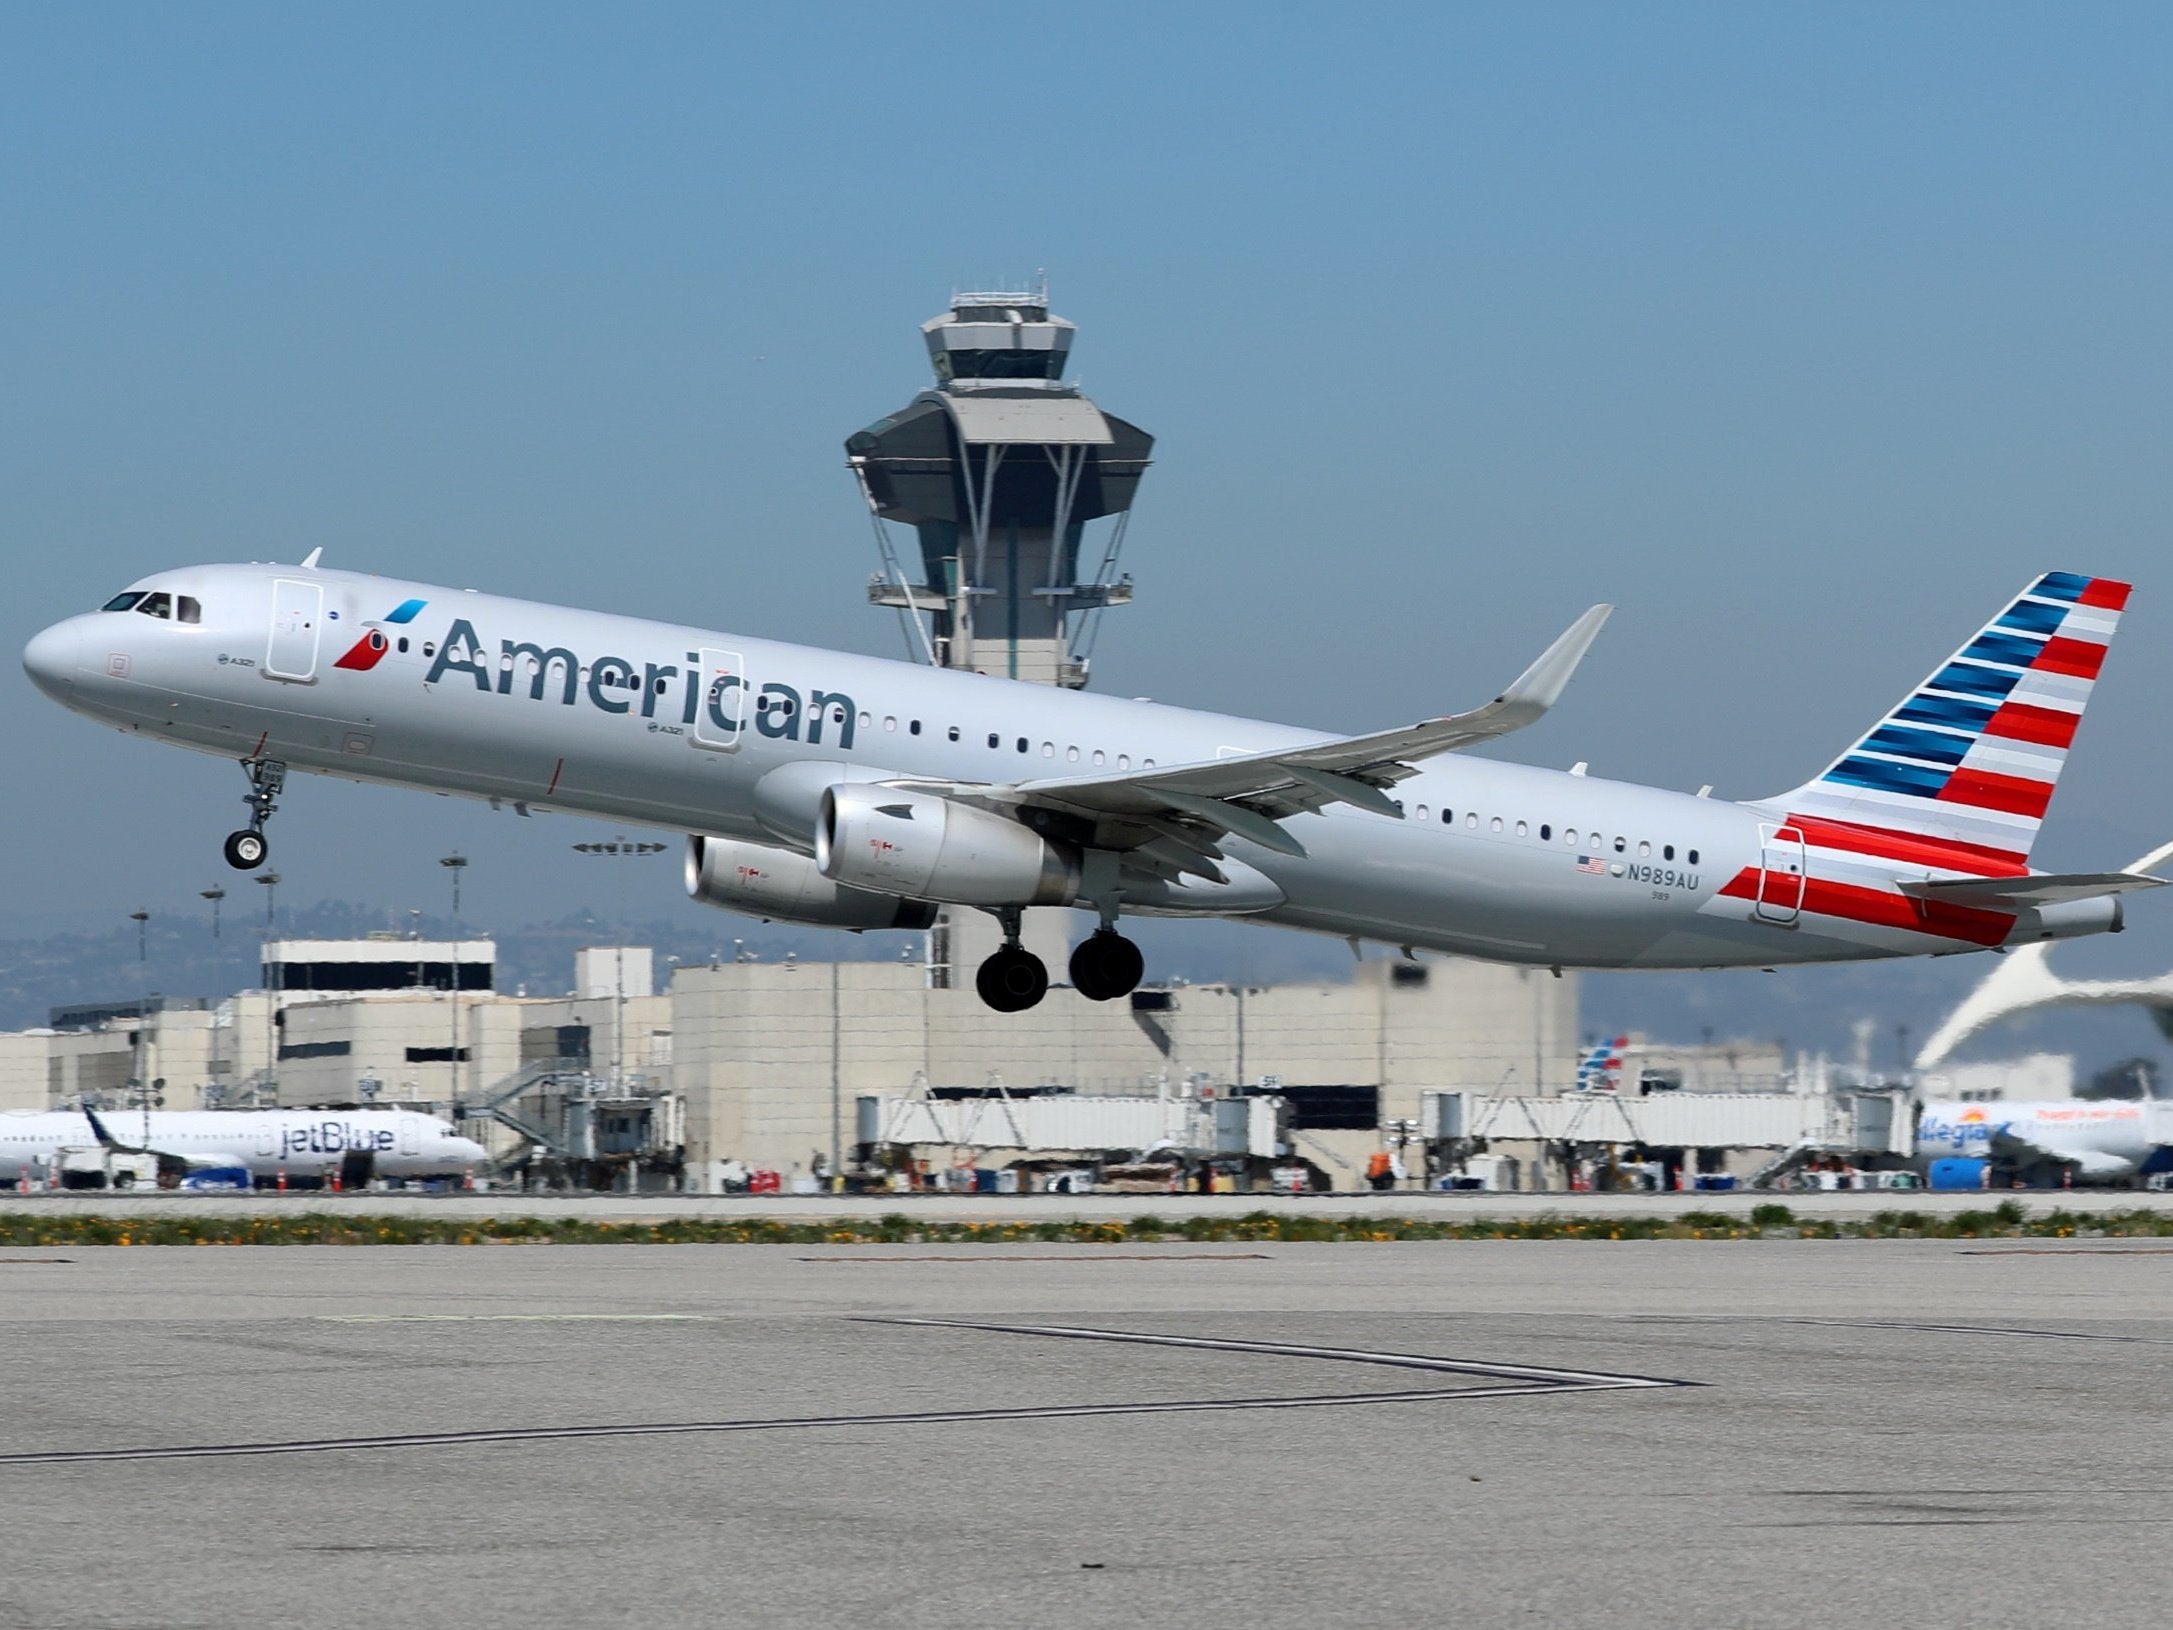 American Airlines has issued an apology to Jordan Flake and her toddler son